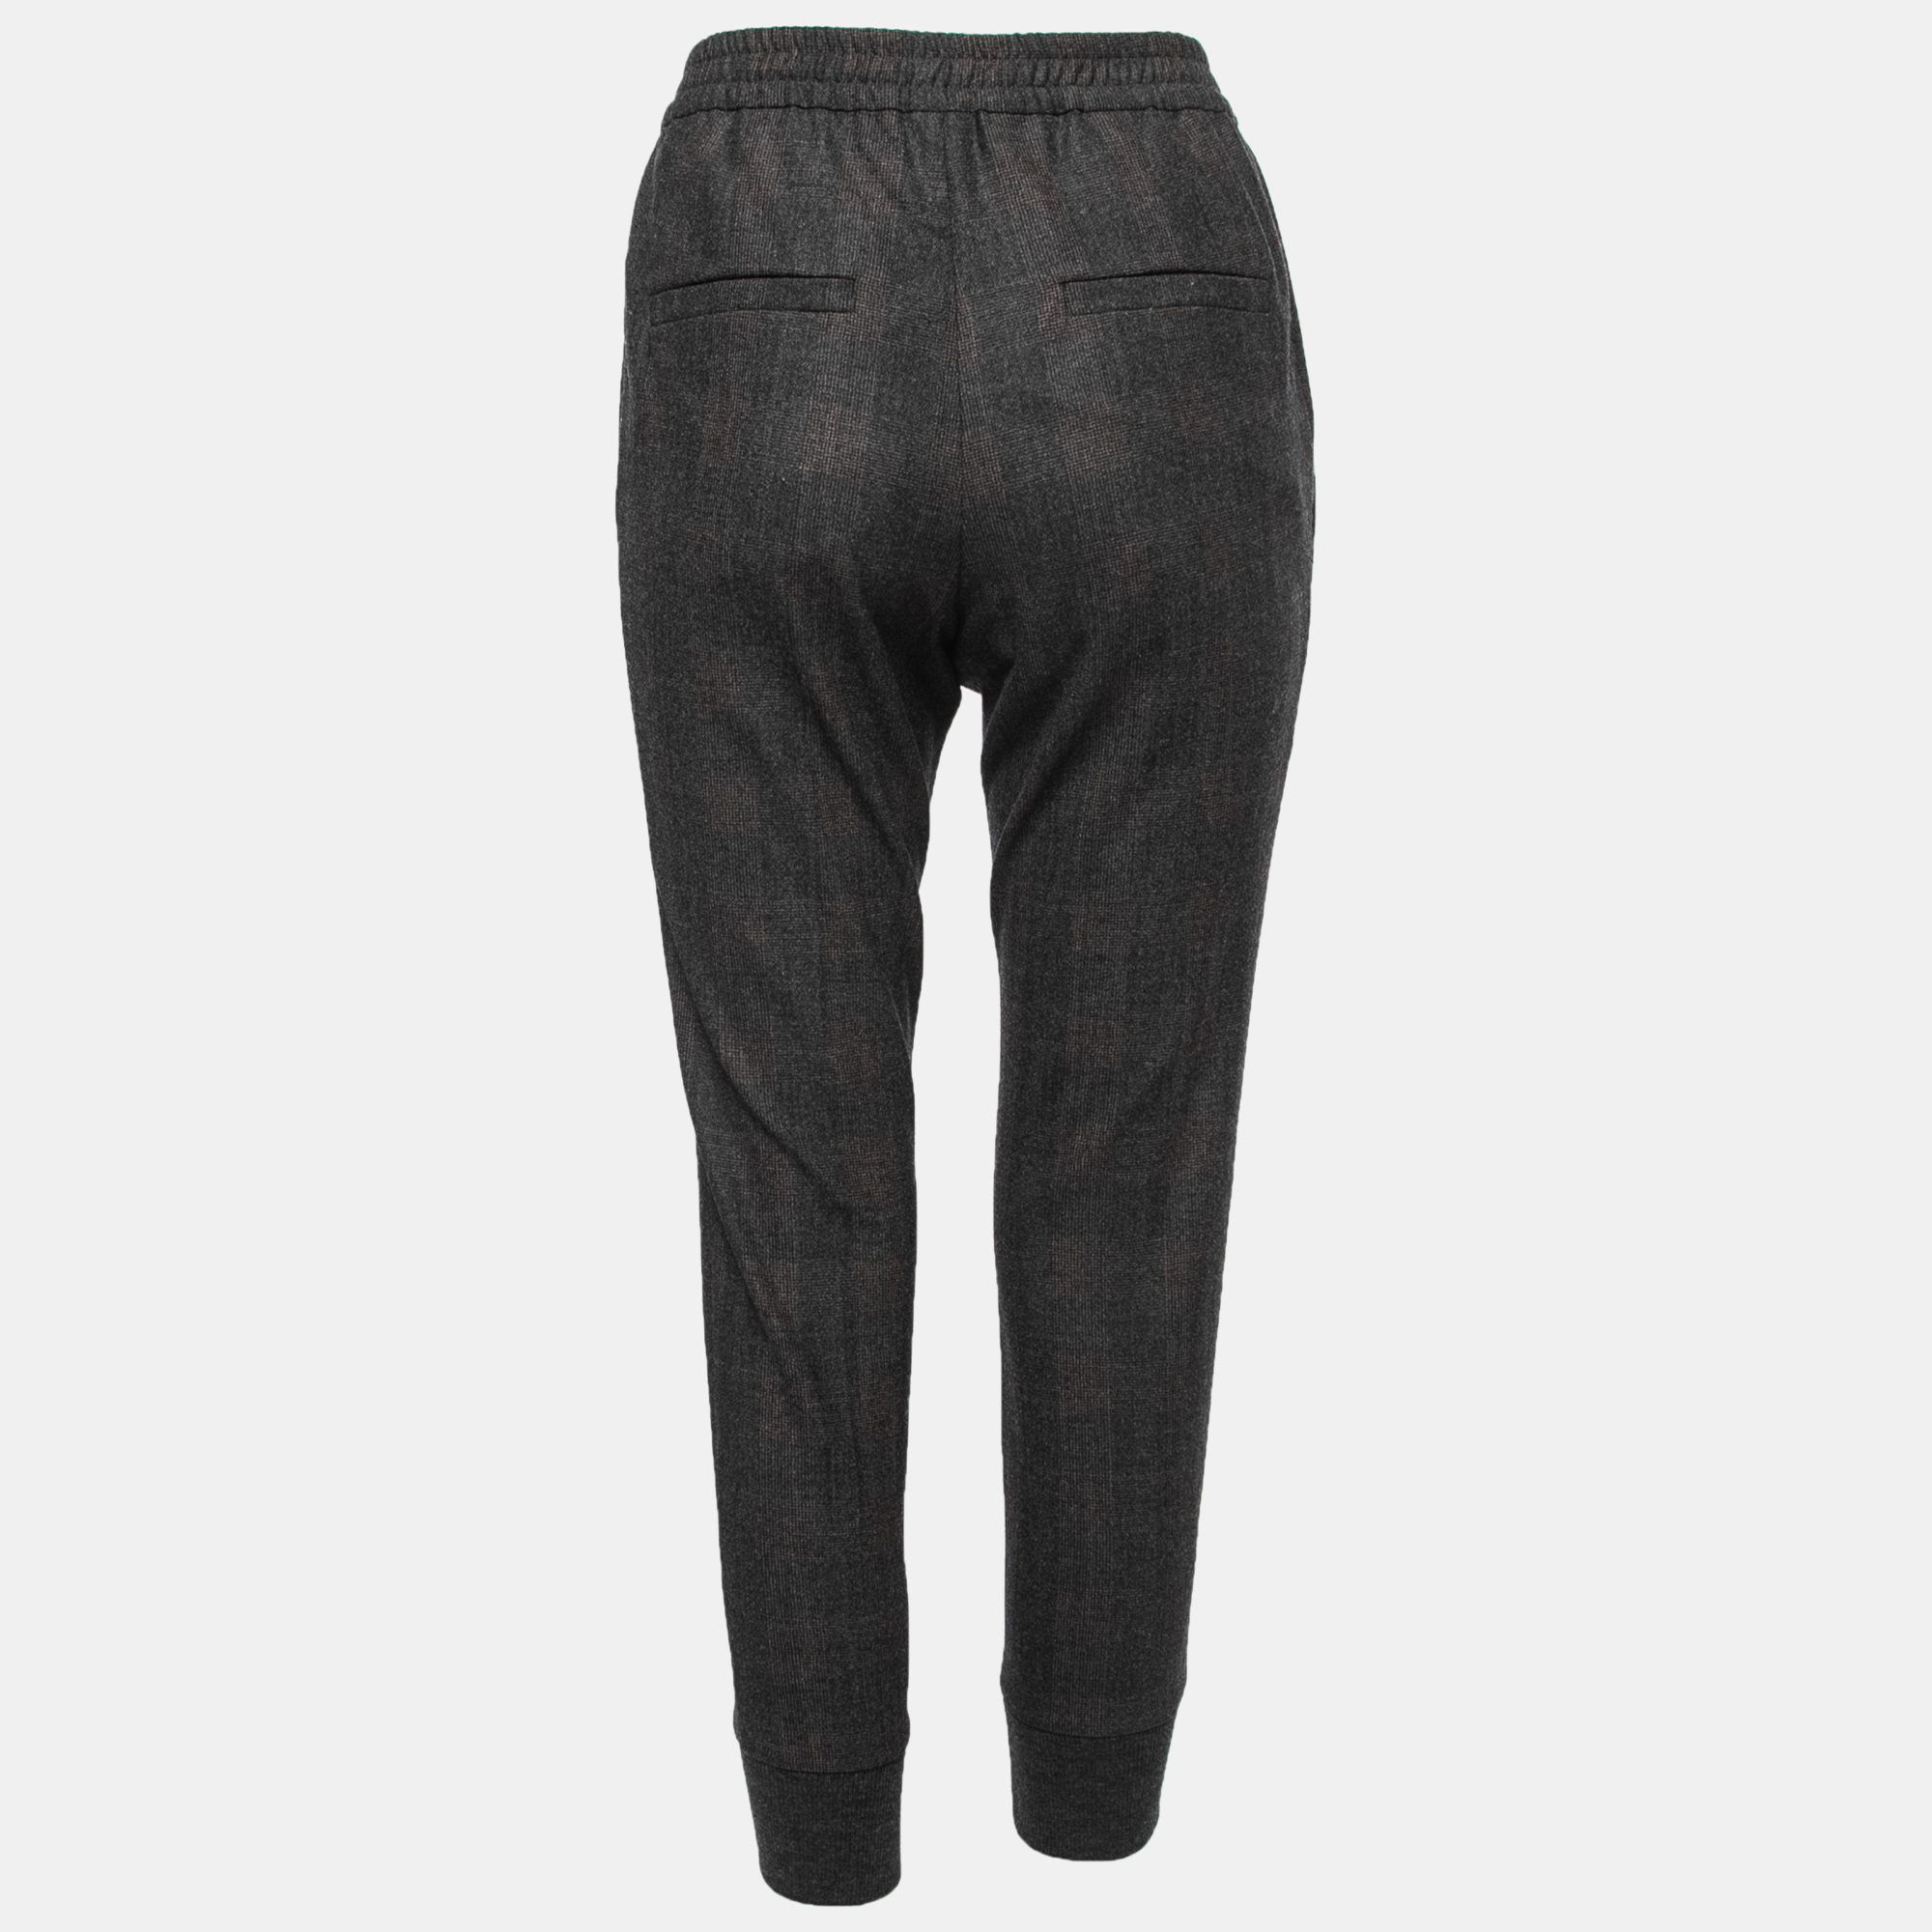 

Brunello Cucinelli Charcoal Grey Wool Rib Knit Trimmed Pants